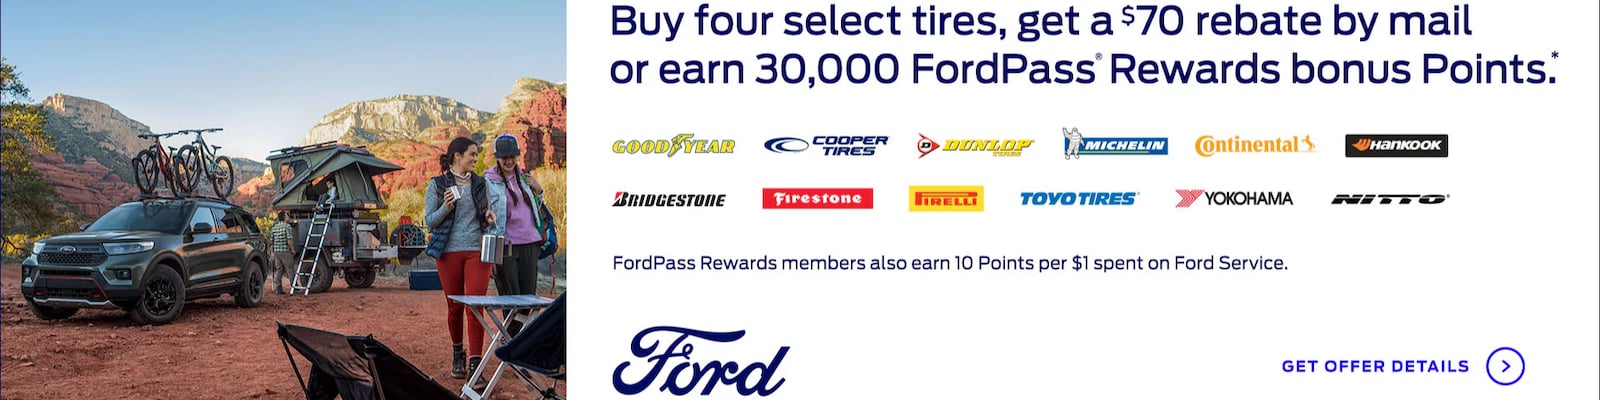 Friendly Ford Used Cars